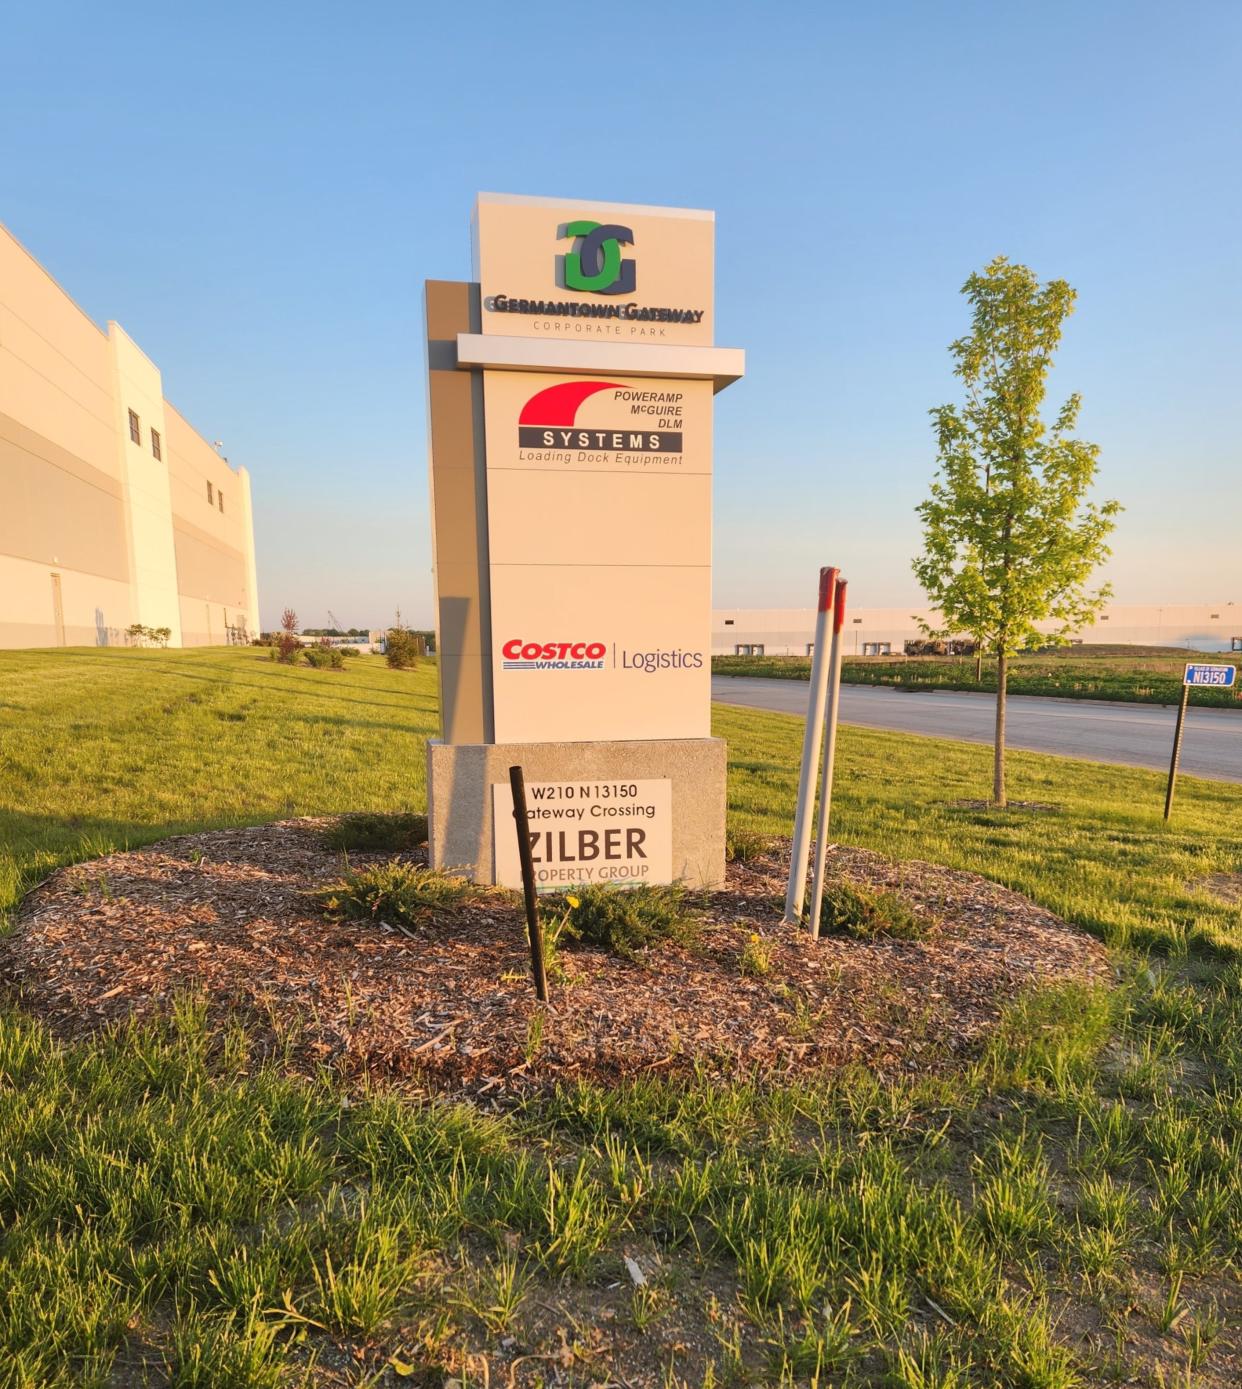 Green Bay Packaging is set to build a new regional headquarters.  This will be a 233,450-square-foot corporate office and light manufacturing facility totaling 52.7 acres for development in the Holy Hill Gateway District in Germantown.